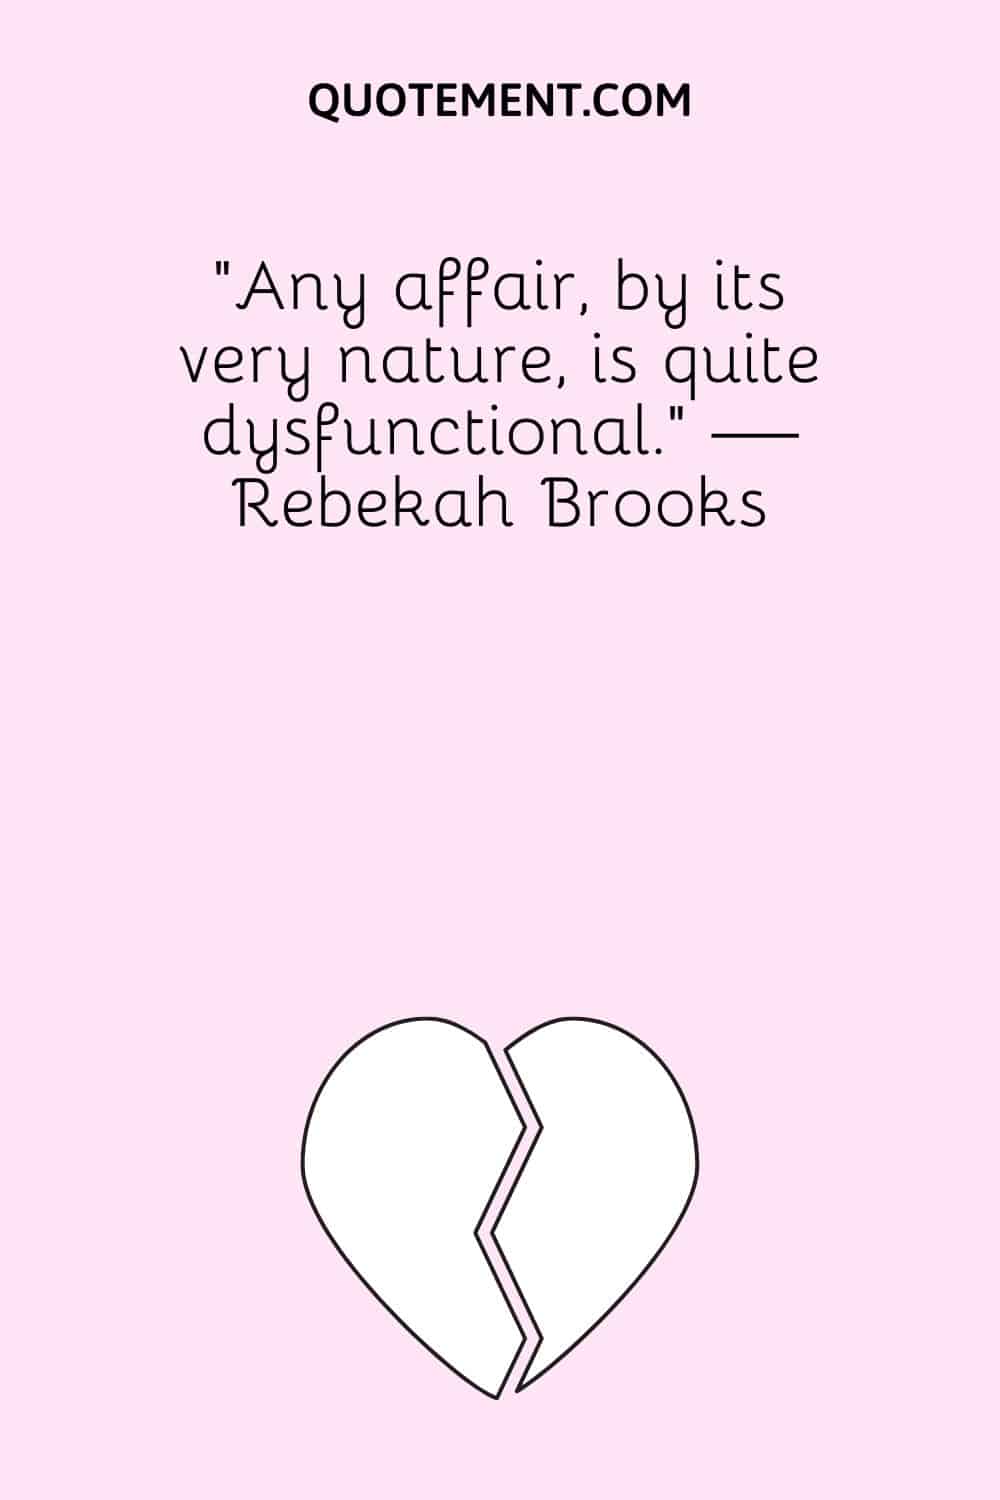 “Any affair, by its very nature, is quite dysfunctional.” — Rebekah Brooks